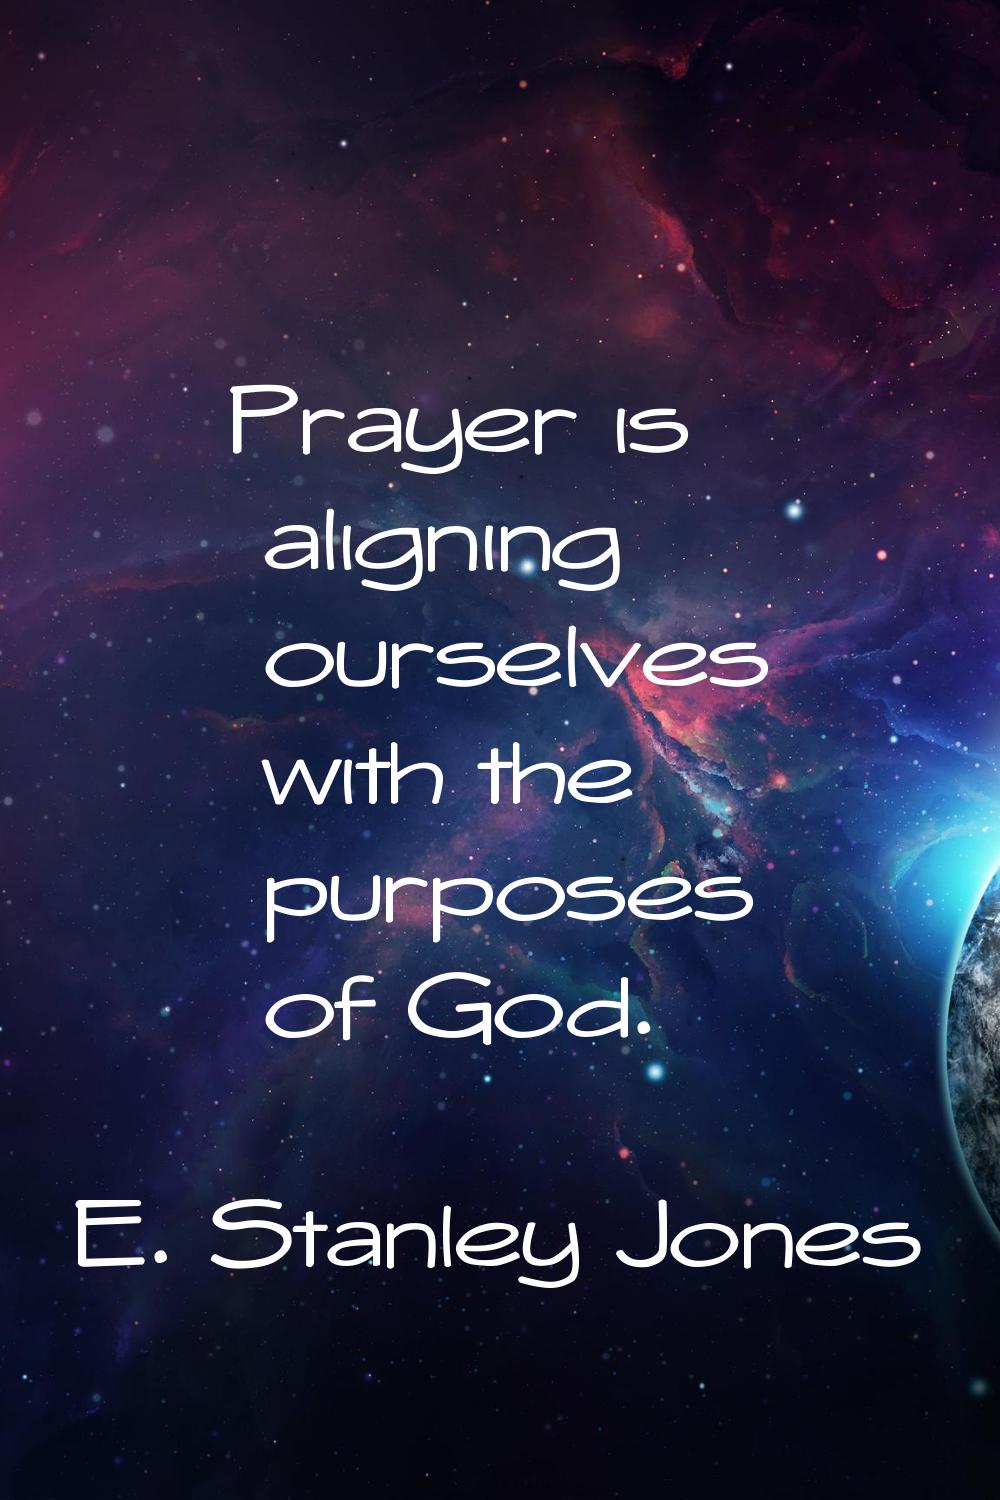 Prayer is aligning ourselves with the purposes of God.